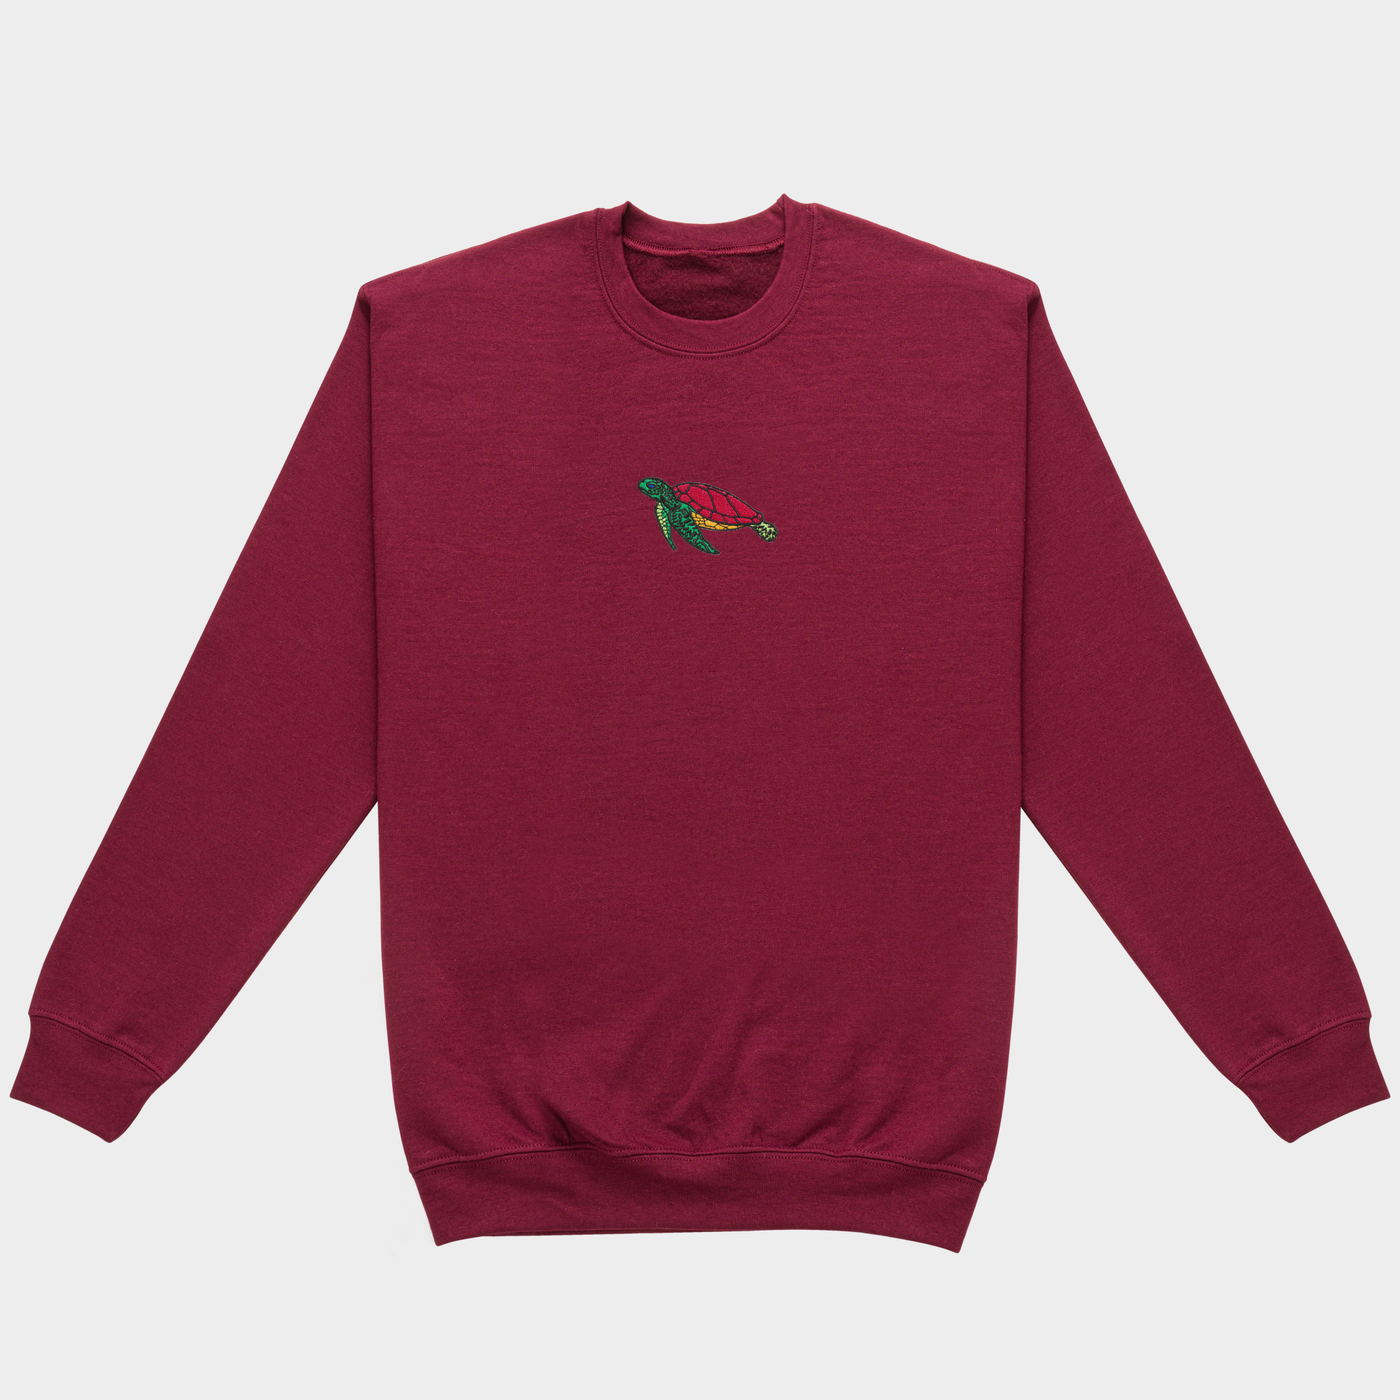 Bobby's Planet Men's Embroidered Sea Turtle Sweatshirt from Seven Seas Fish Animals Collection in Maroon Color#color_maroon